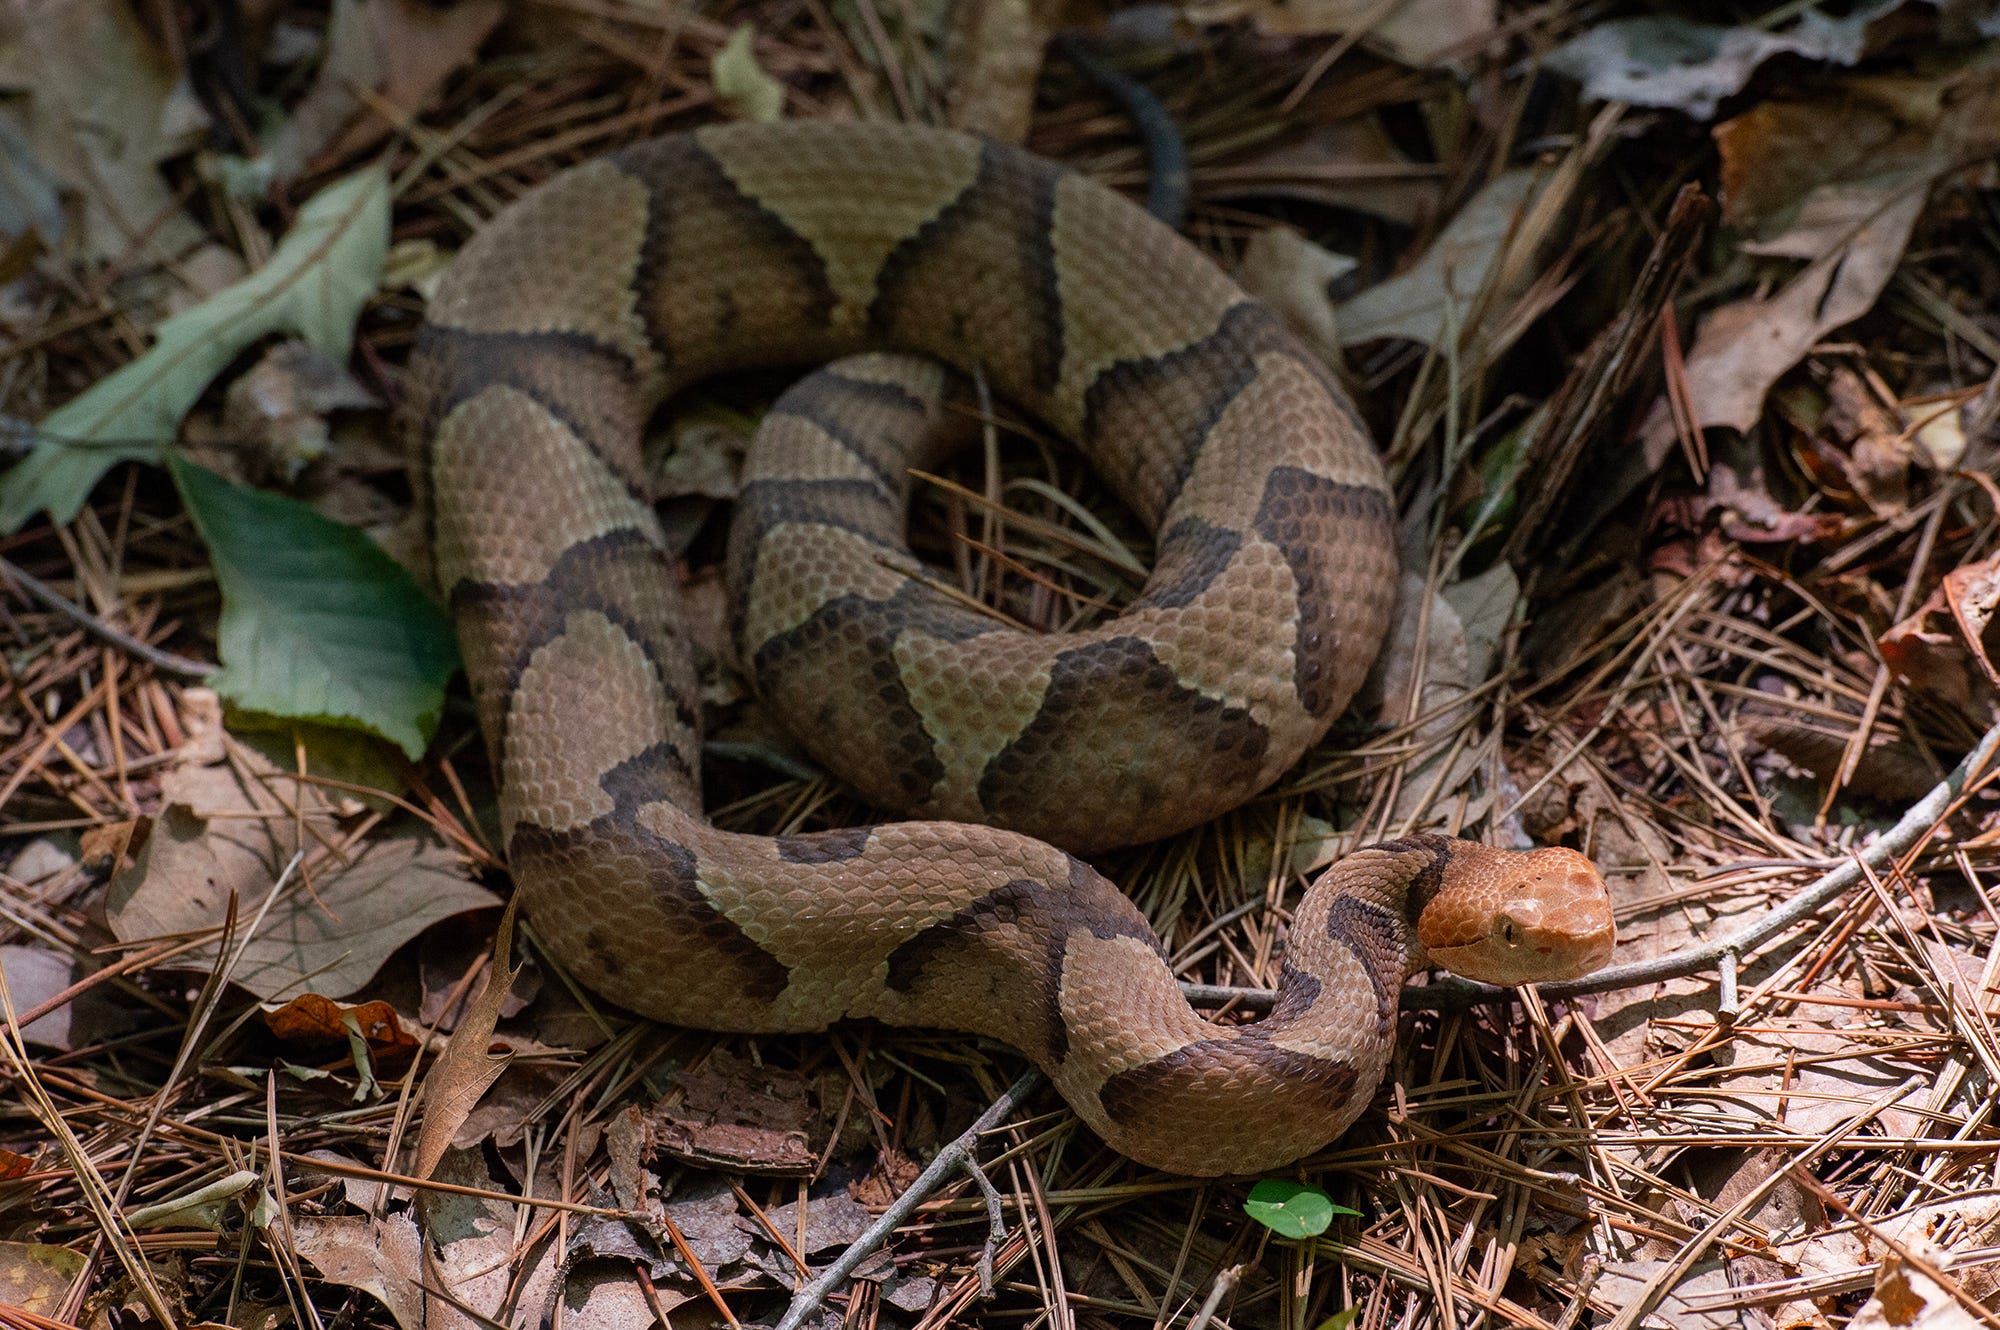 6 venomous snakes in SC, Greenville: What to know about rattlesnakes, copperheads, more